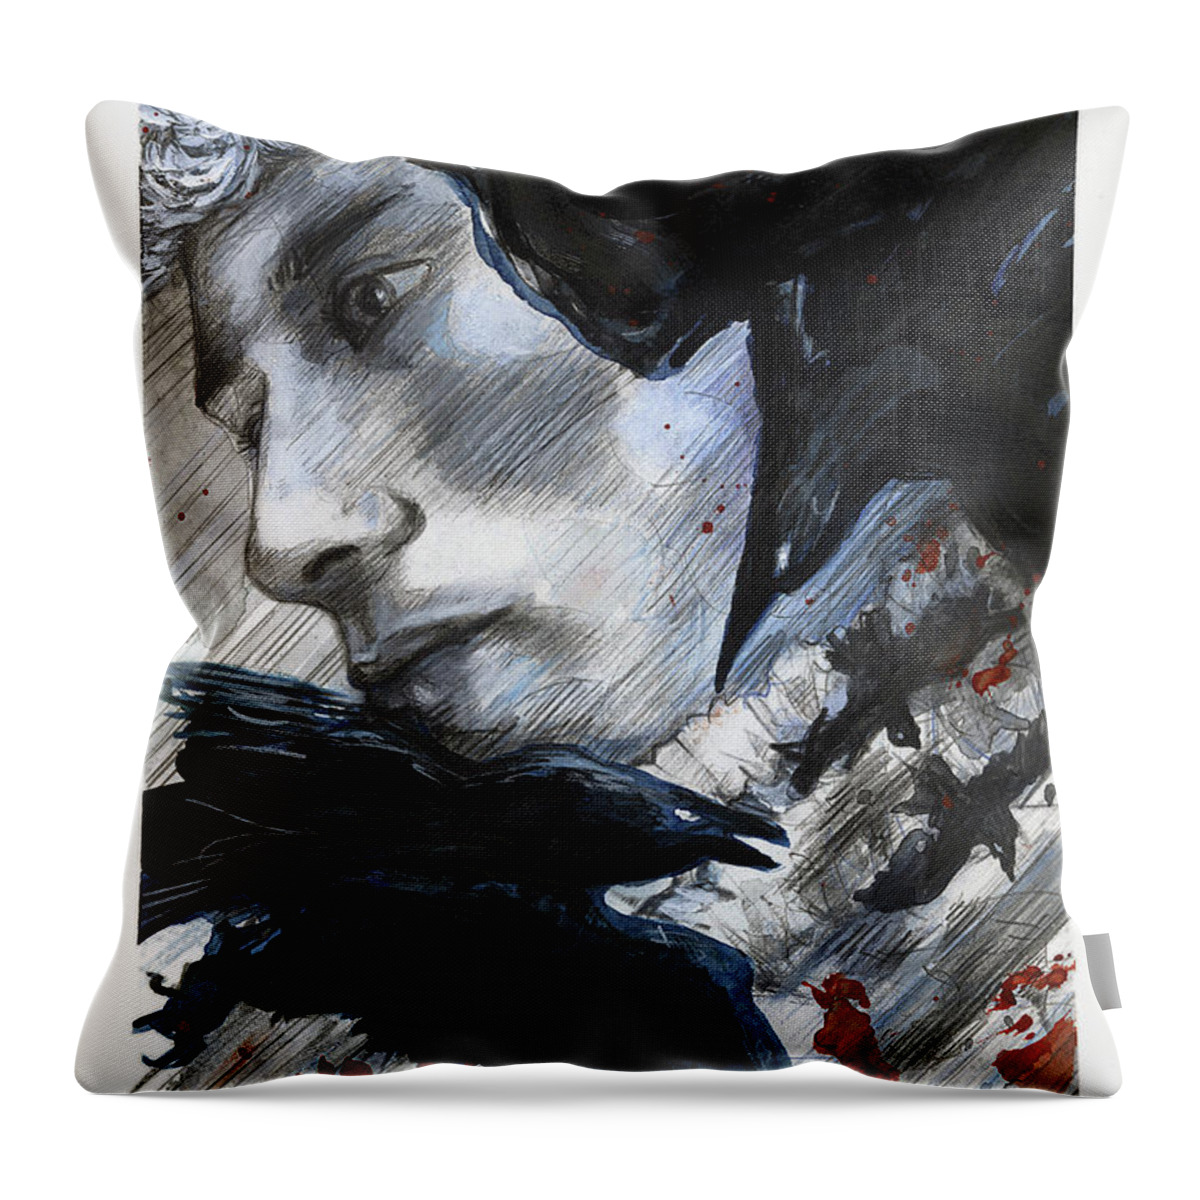 Crows Throw Pillow featuring the painting Two Ravens Bringing Blood To The Skies by Rene Capone